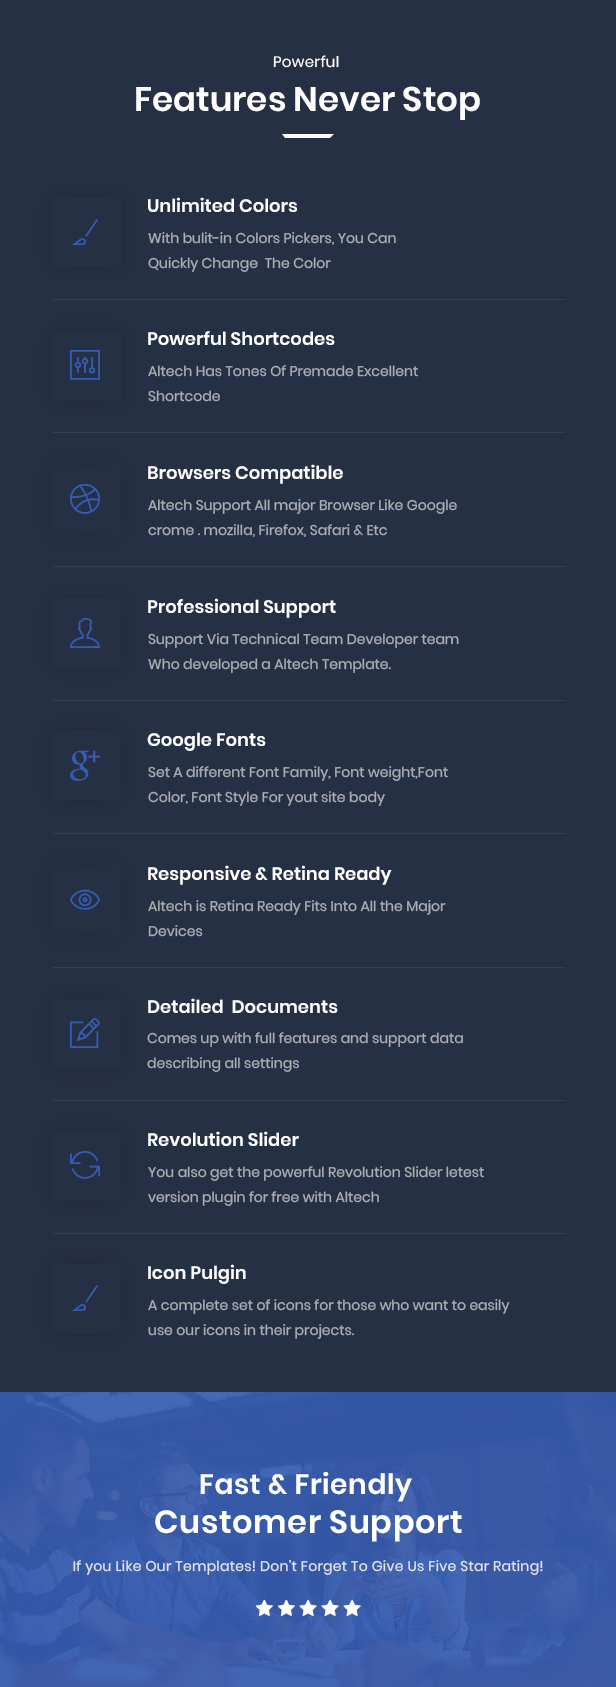 IT Sollutions and Services HTML Template